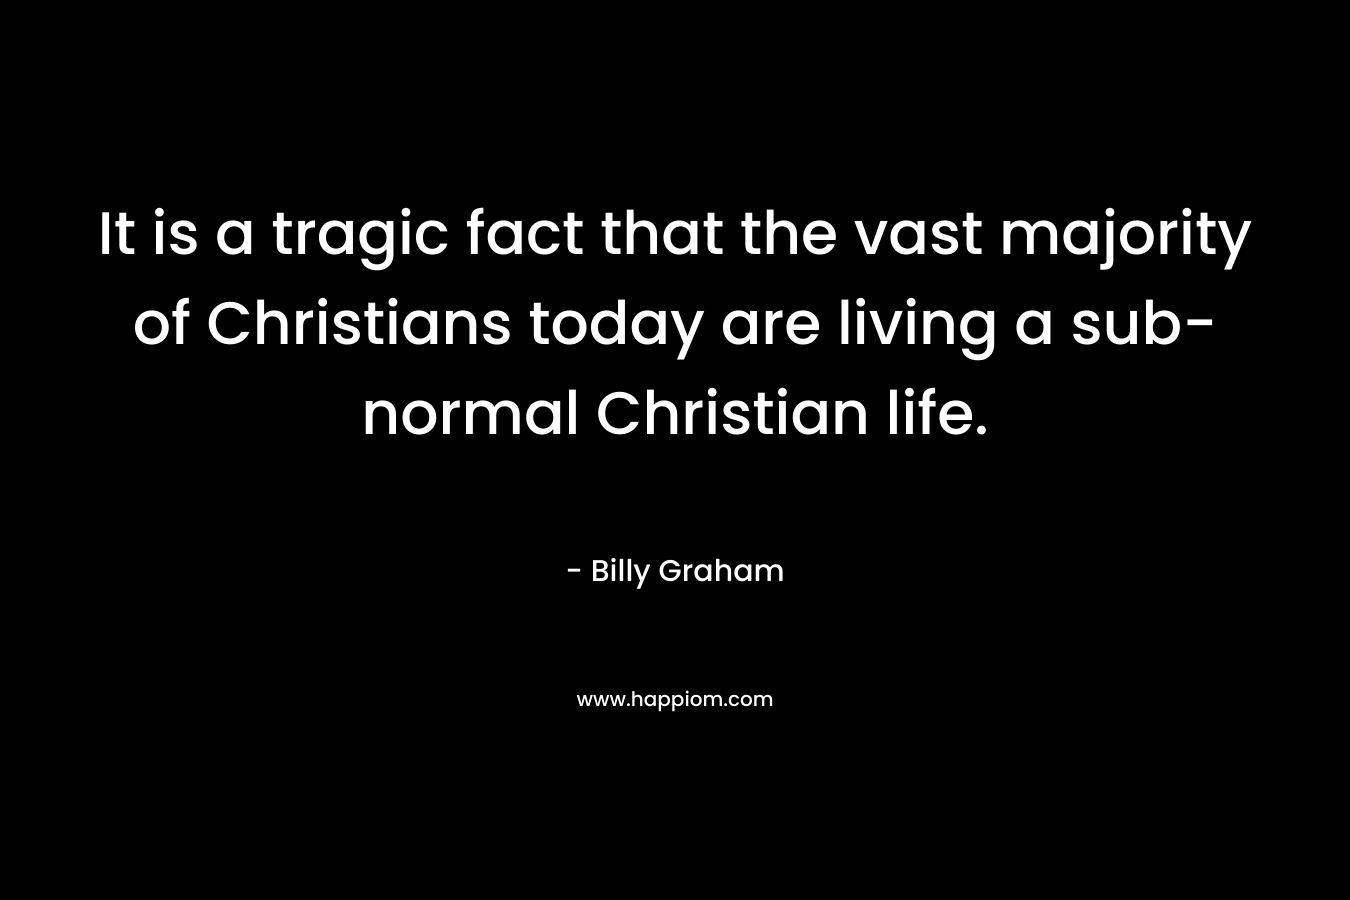 It is a tragic fact that the vast majority of Christians today are living a sub-normal Christian life.